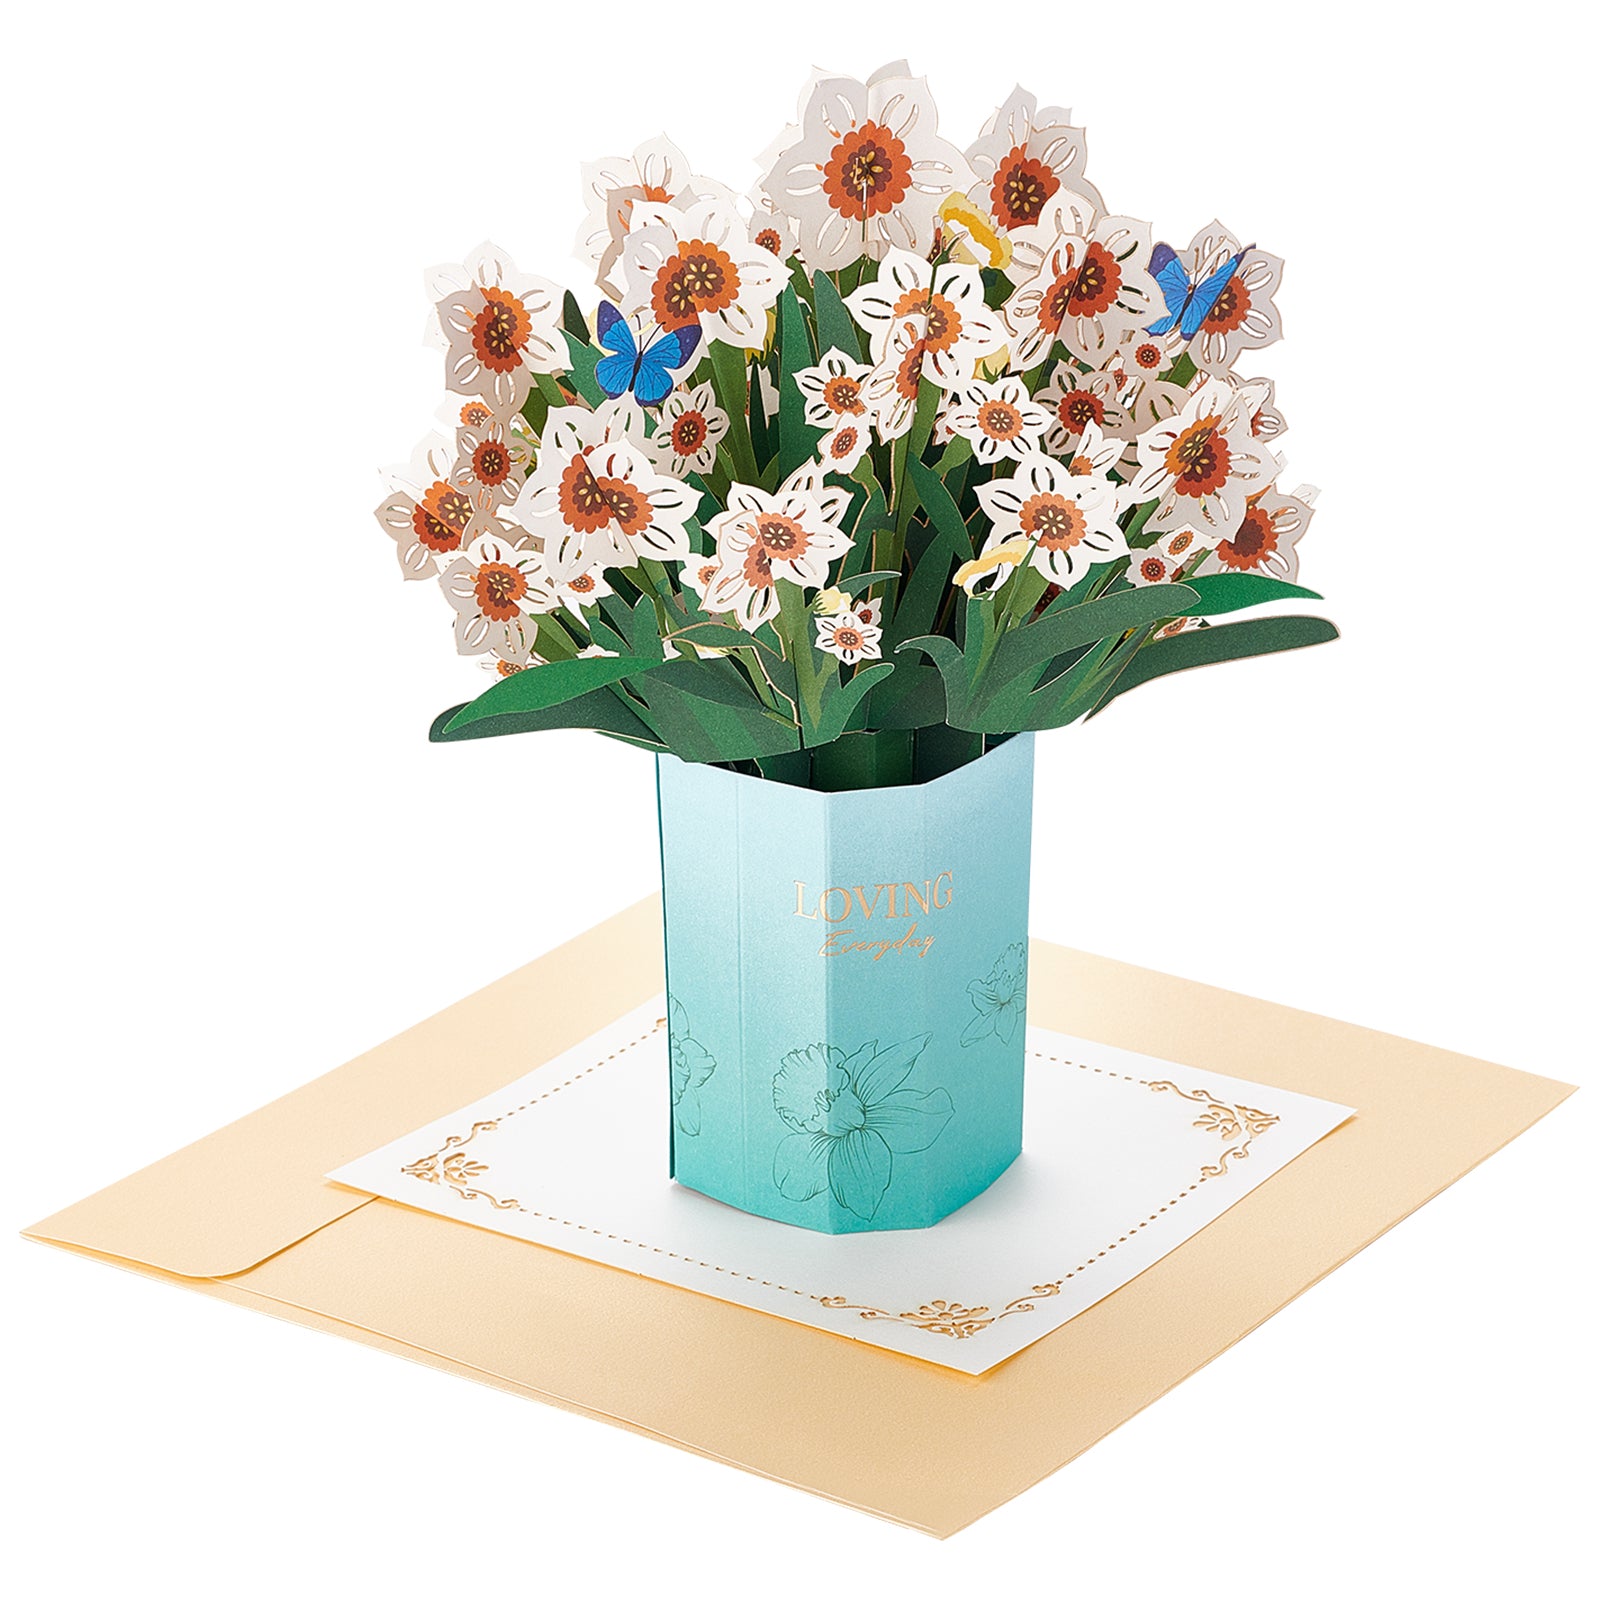 Pop Up Cards Flowers 3D Paper Pop Up Cards,3D Greeting Card Birthday Pop Up Card with Paper & Envelope, Forever Flower Bouquet for Mother's Day, Thank You, Valentine's Day